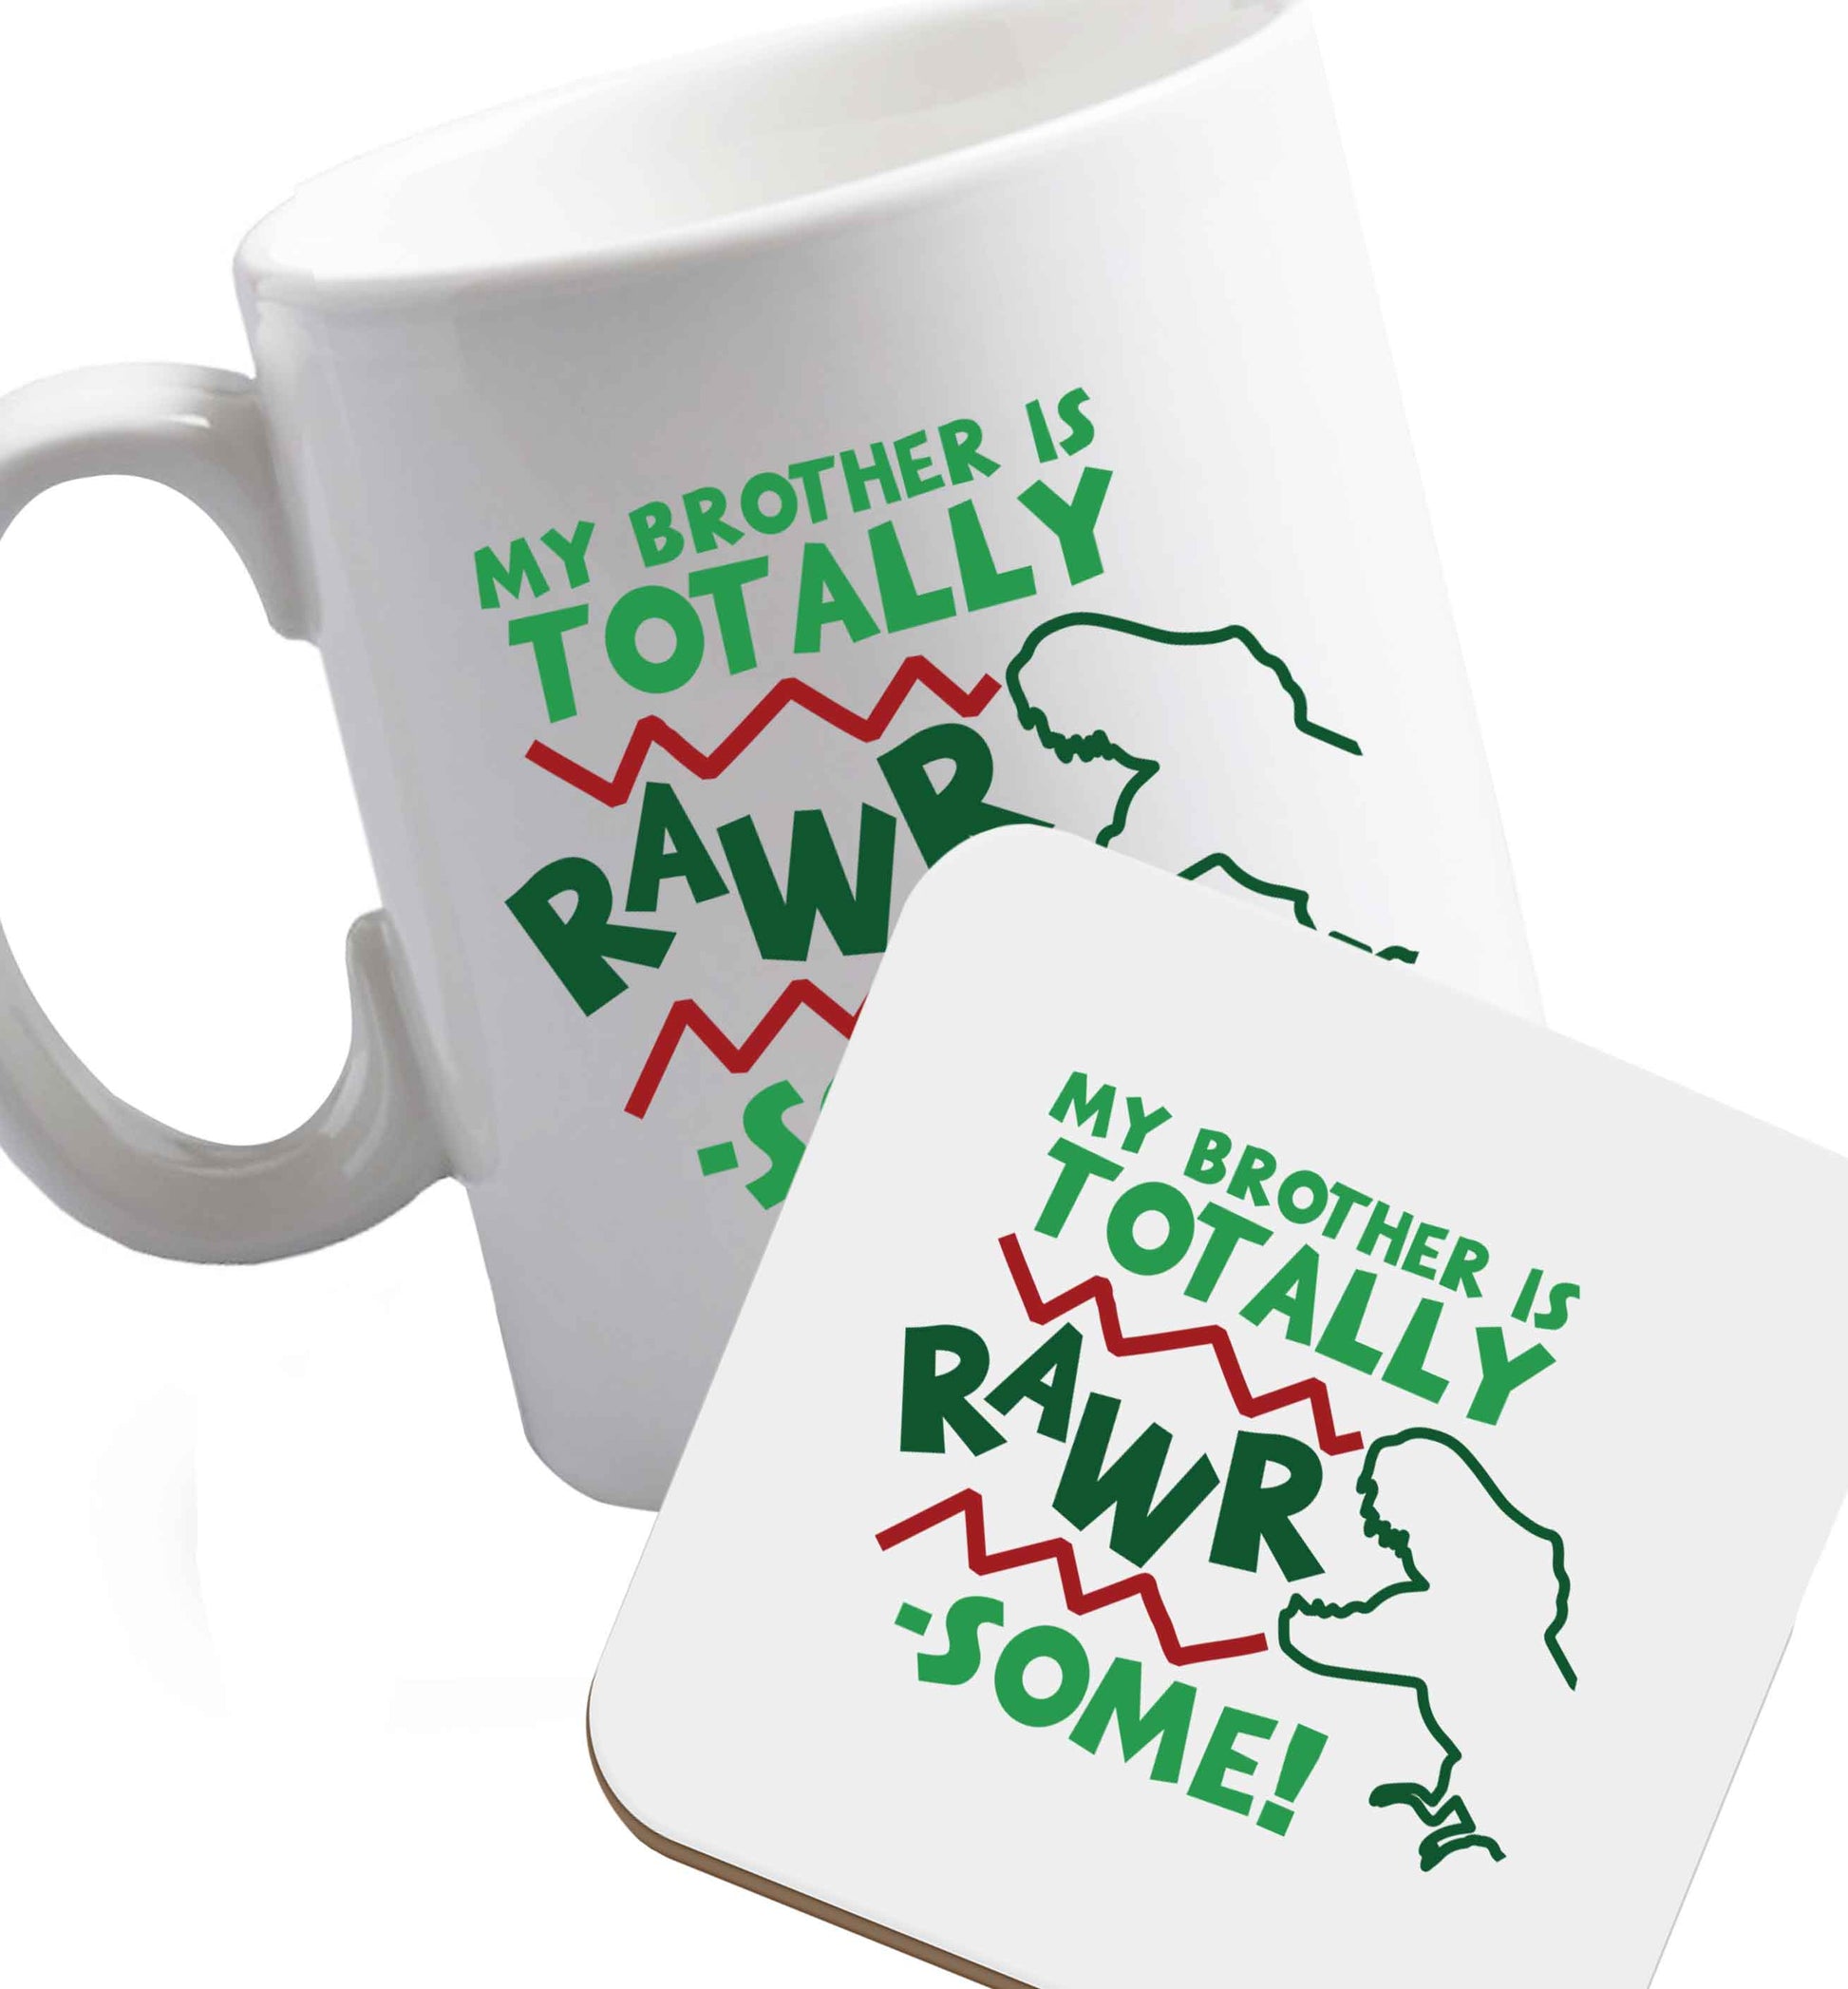 10 oz My brother is totally rawrsome ceramic mug and coaster set right handed